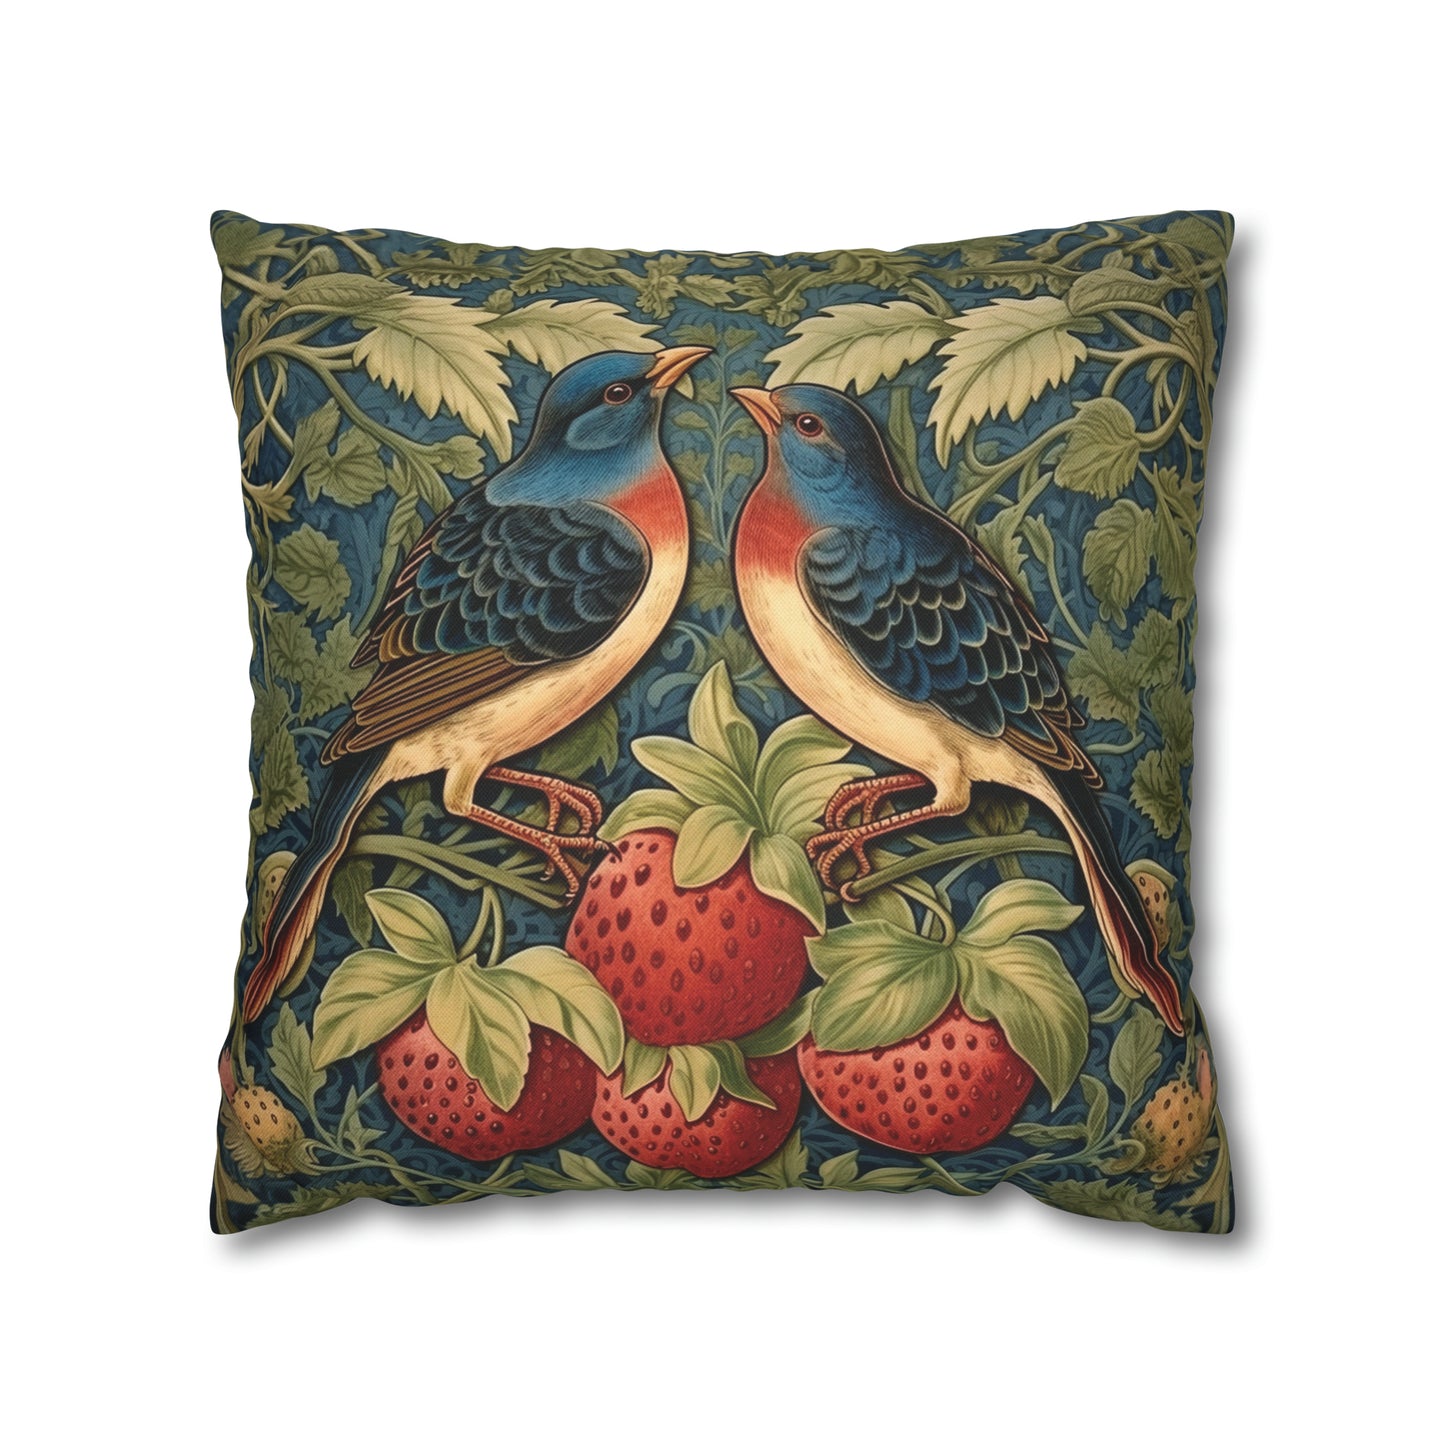 Floral Birds Strawberries Floral Pillow and Case